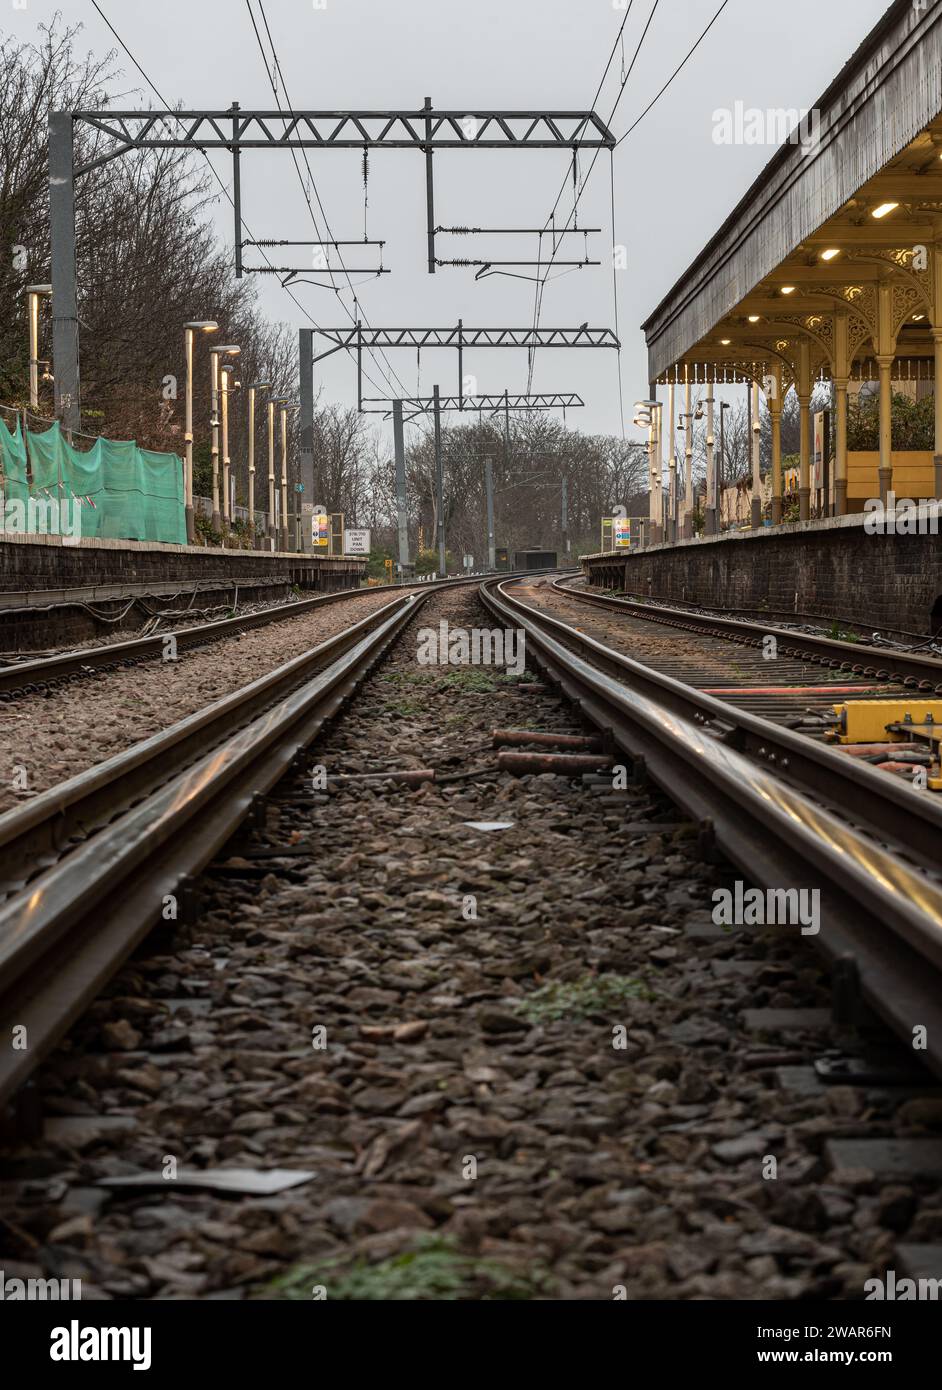 London, UK - Dec 25, 2023 - Railway iron rails from the low perspective. Railroad tracks with limited depth of focus, The Railway system with Metal fr Stock Photo